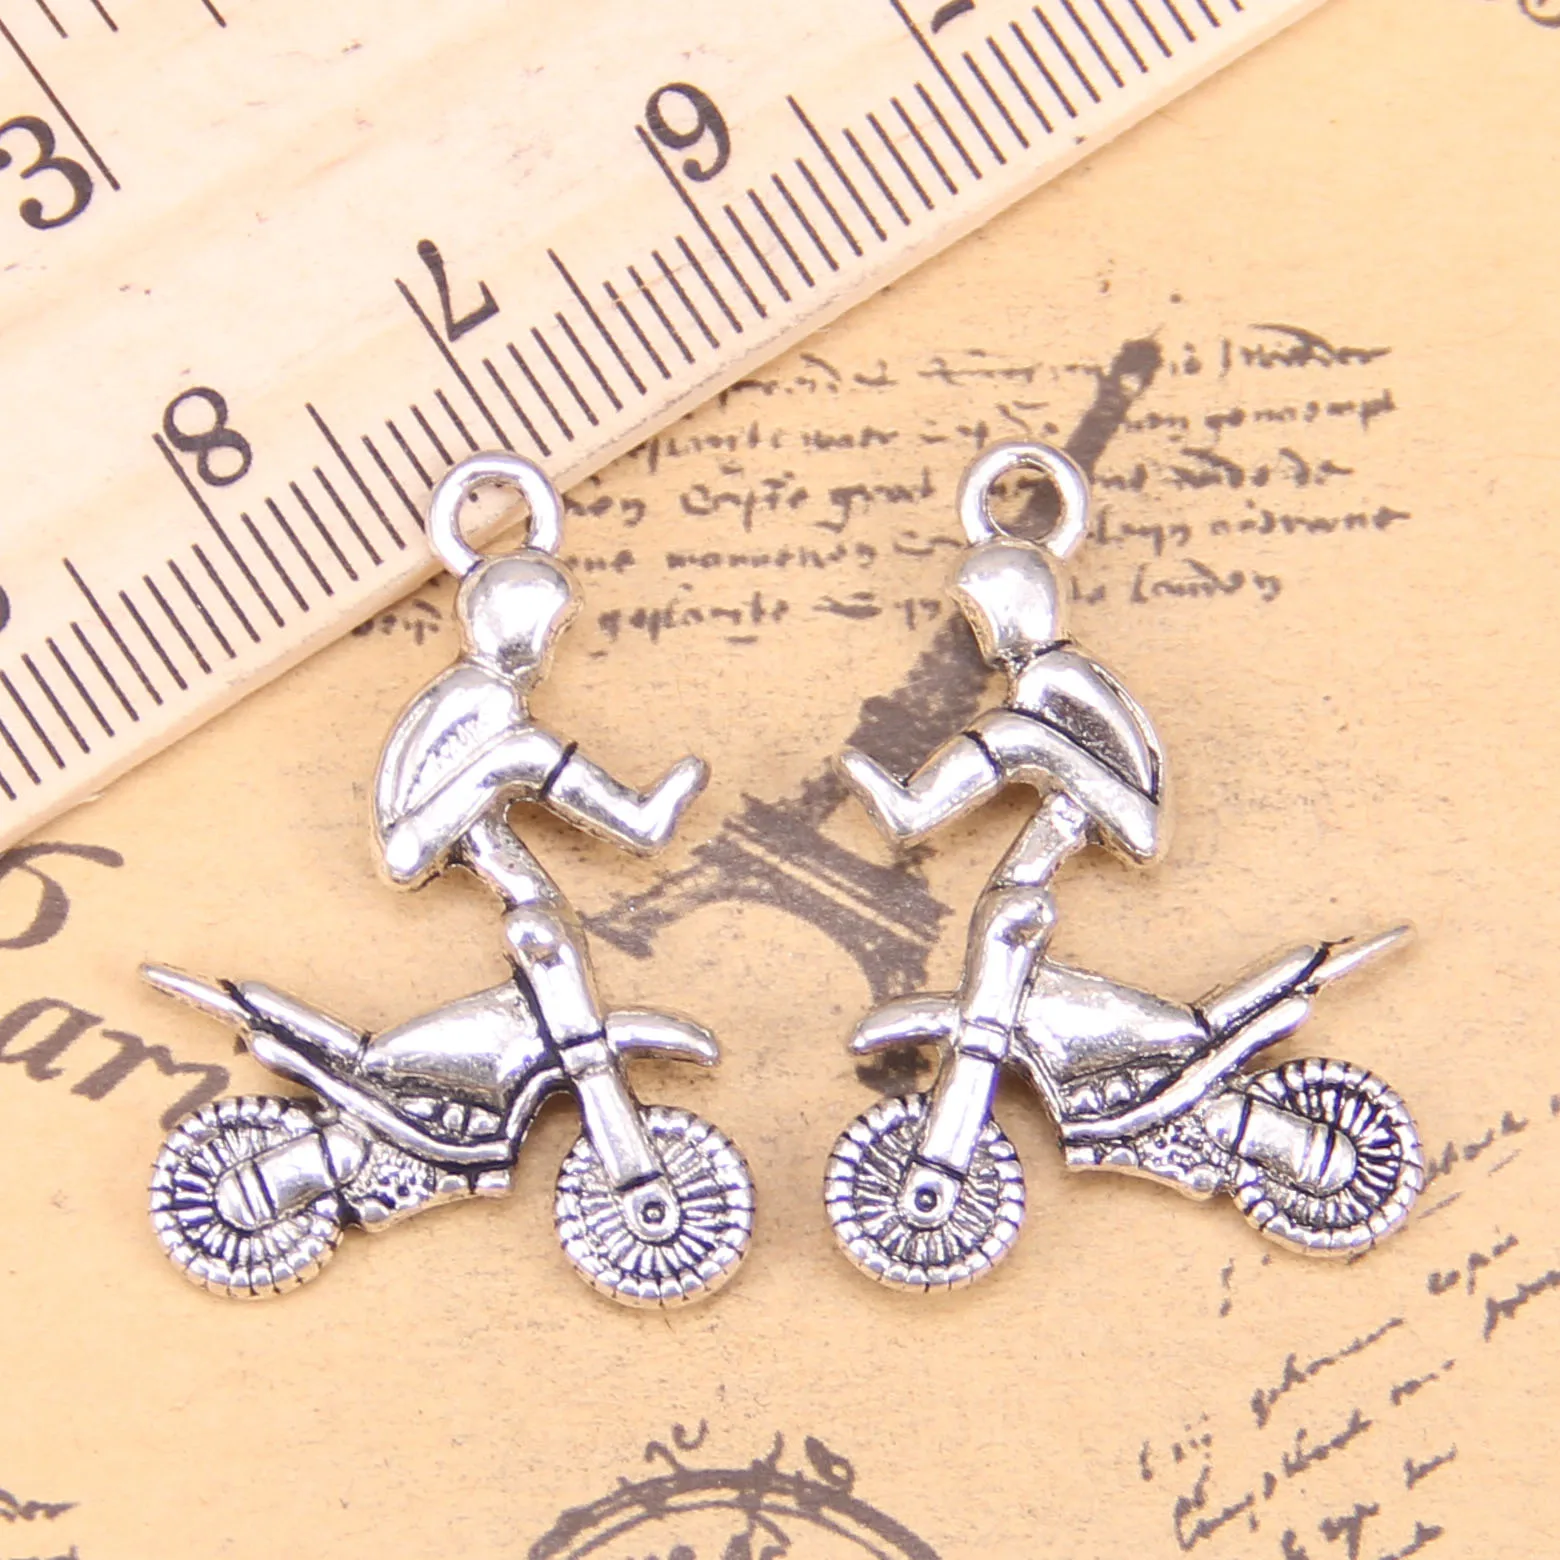 

32pcs Jewelry Charms Motorcycle Motorcross 29x23mm Antique Silver Plated Pendants Making DIY Handmade Tibetan Silver Jewelry